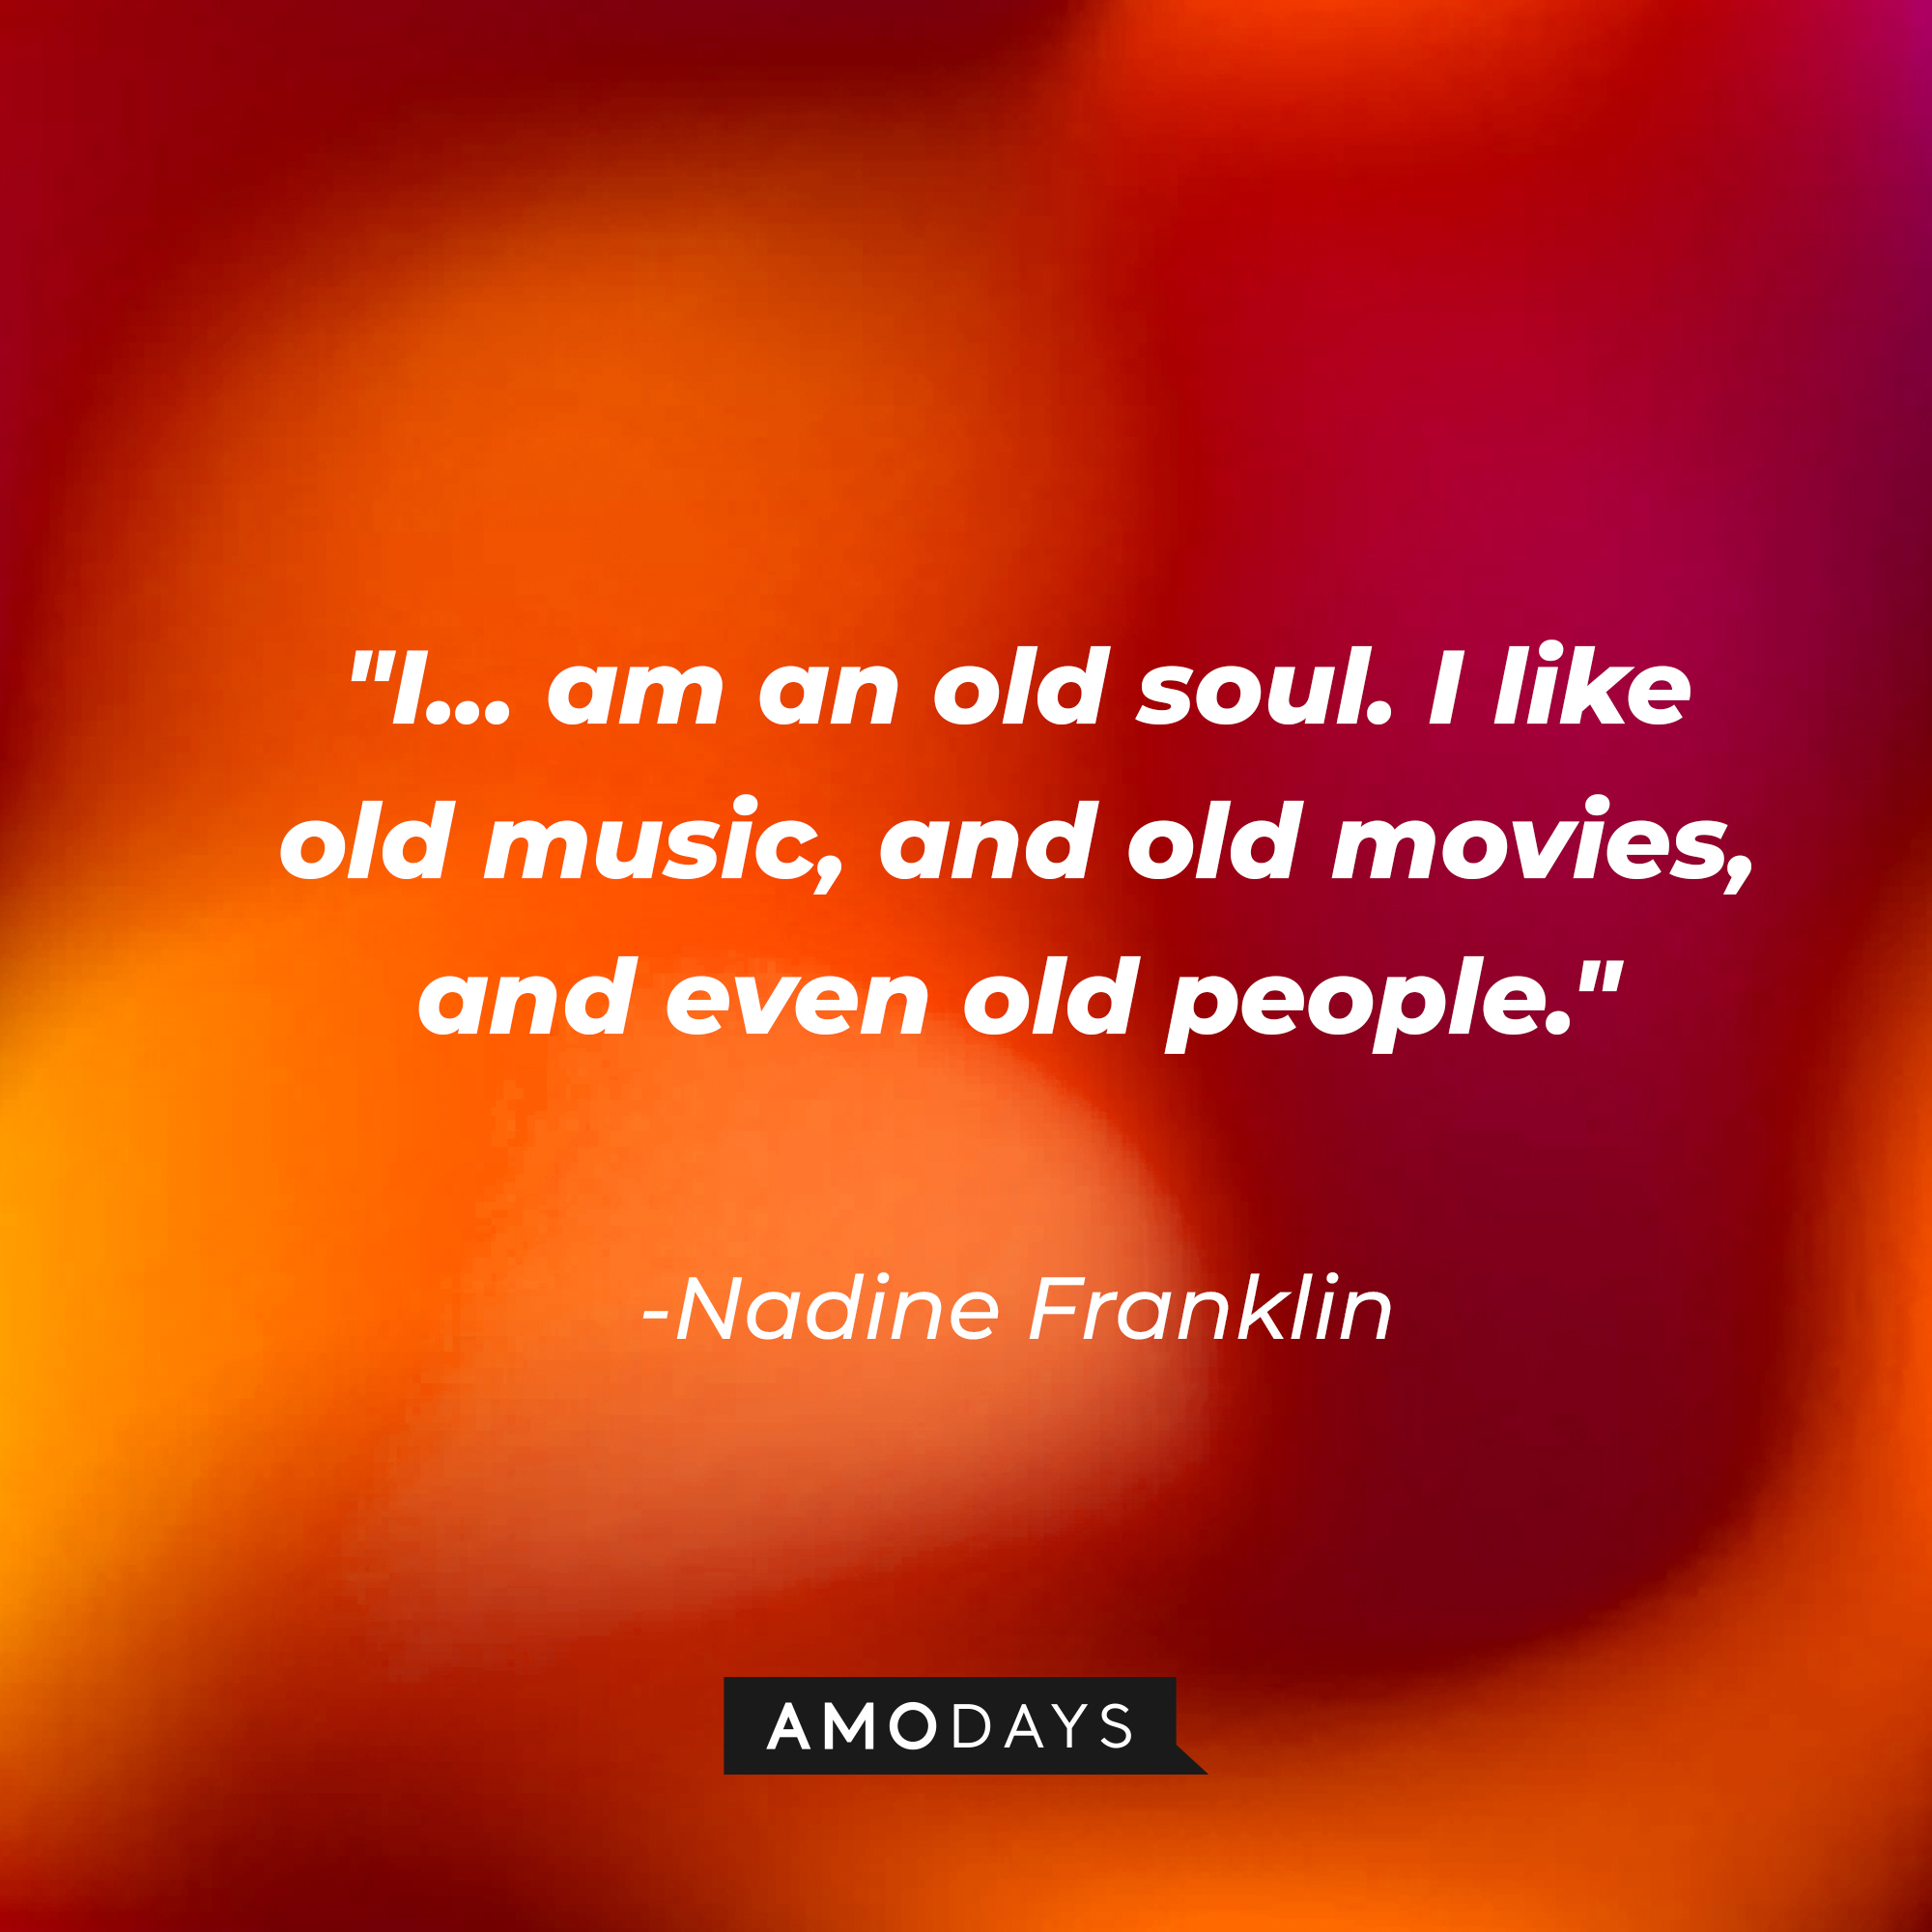 Nadine Franklin's quote: "I... am an old soul. I like old music, and old movies, and even old people." | Source: AmoDays